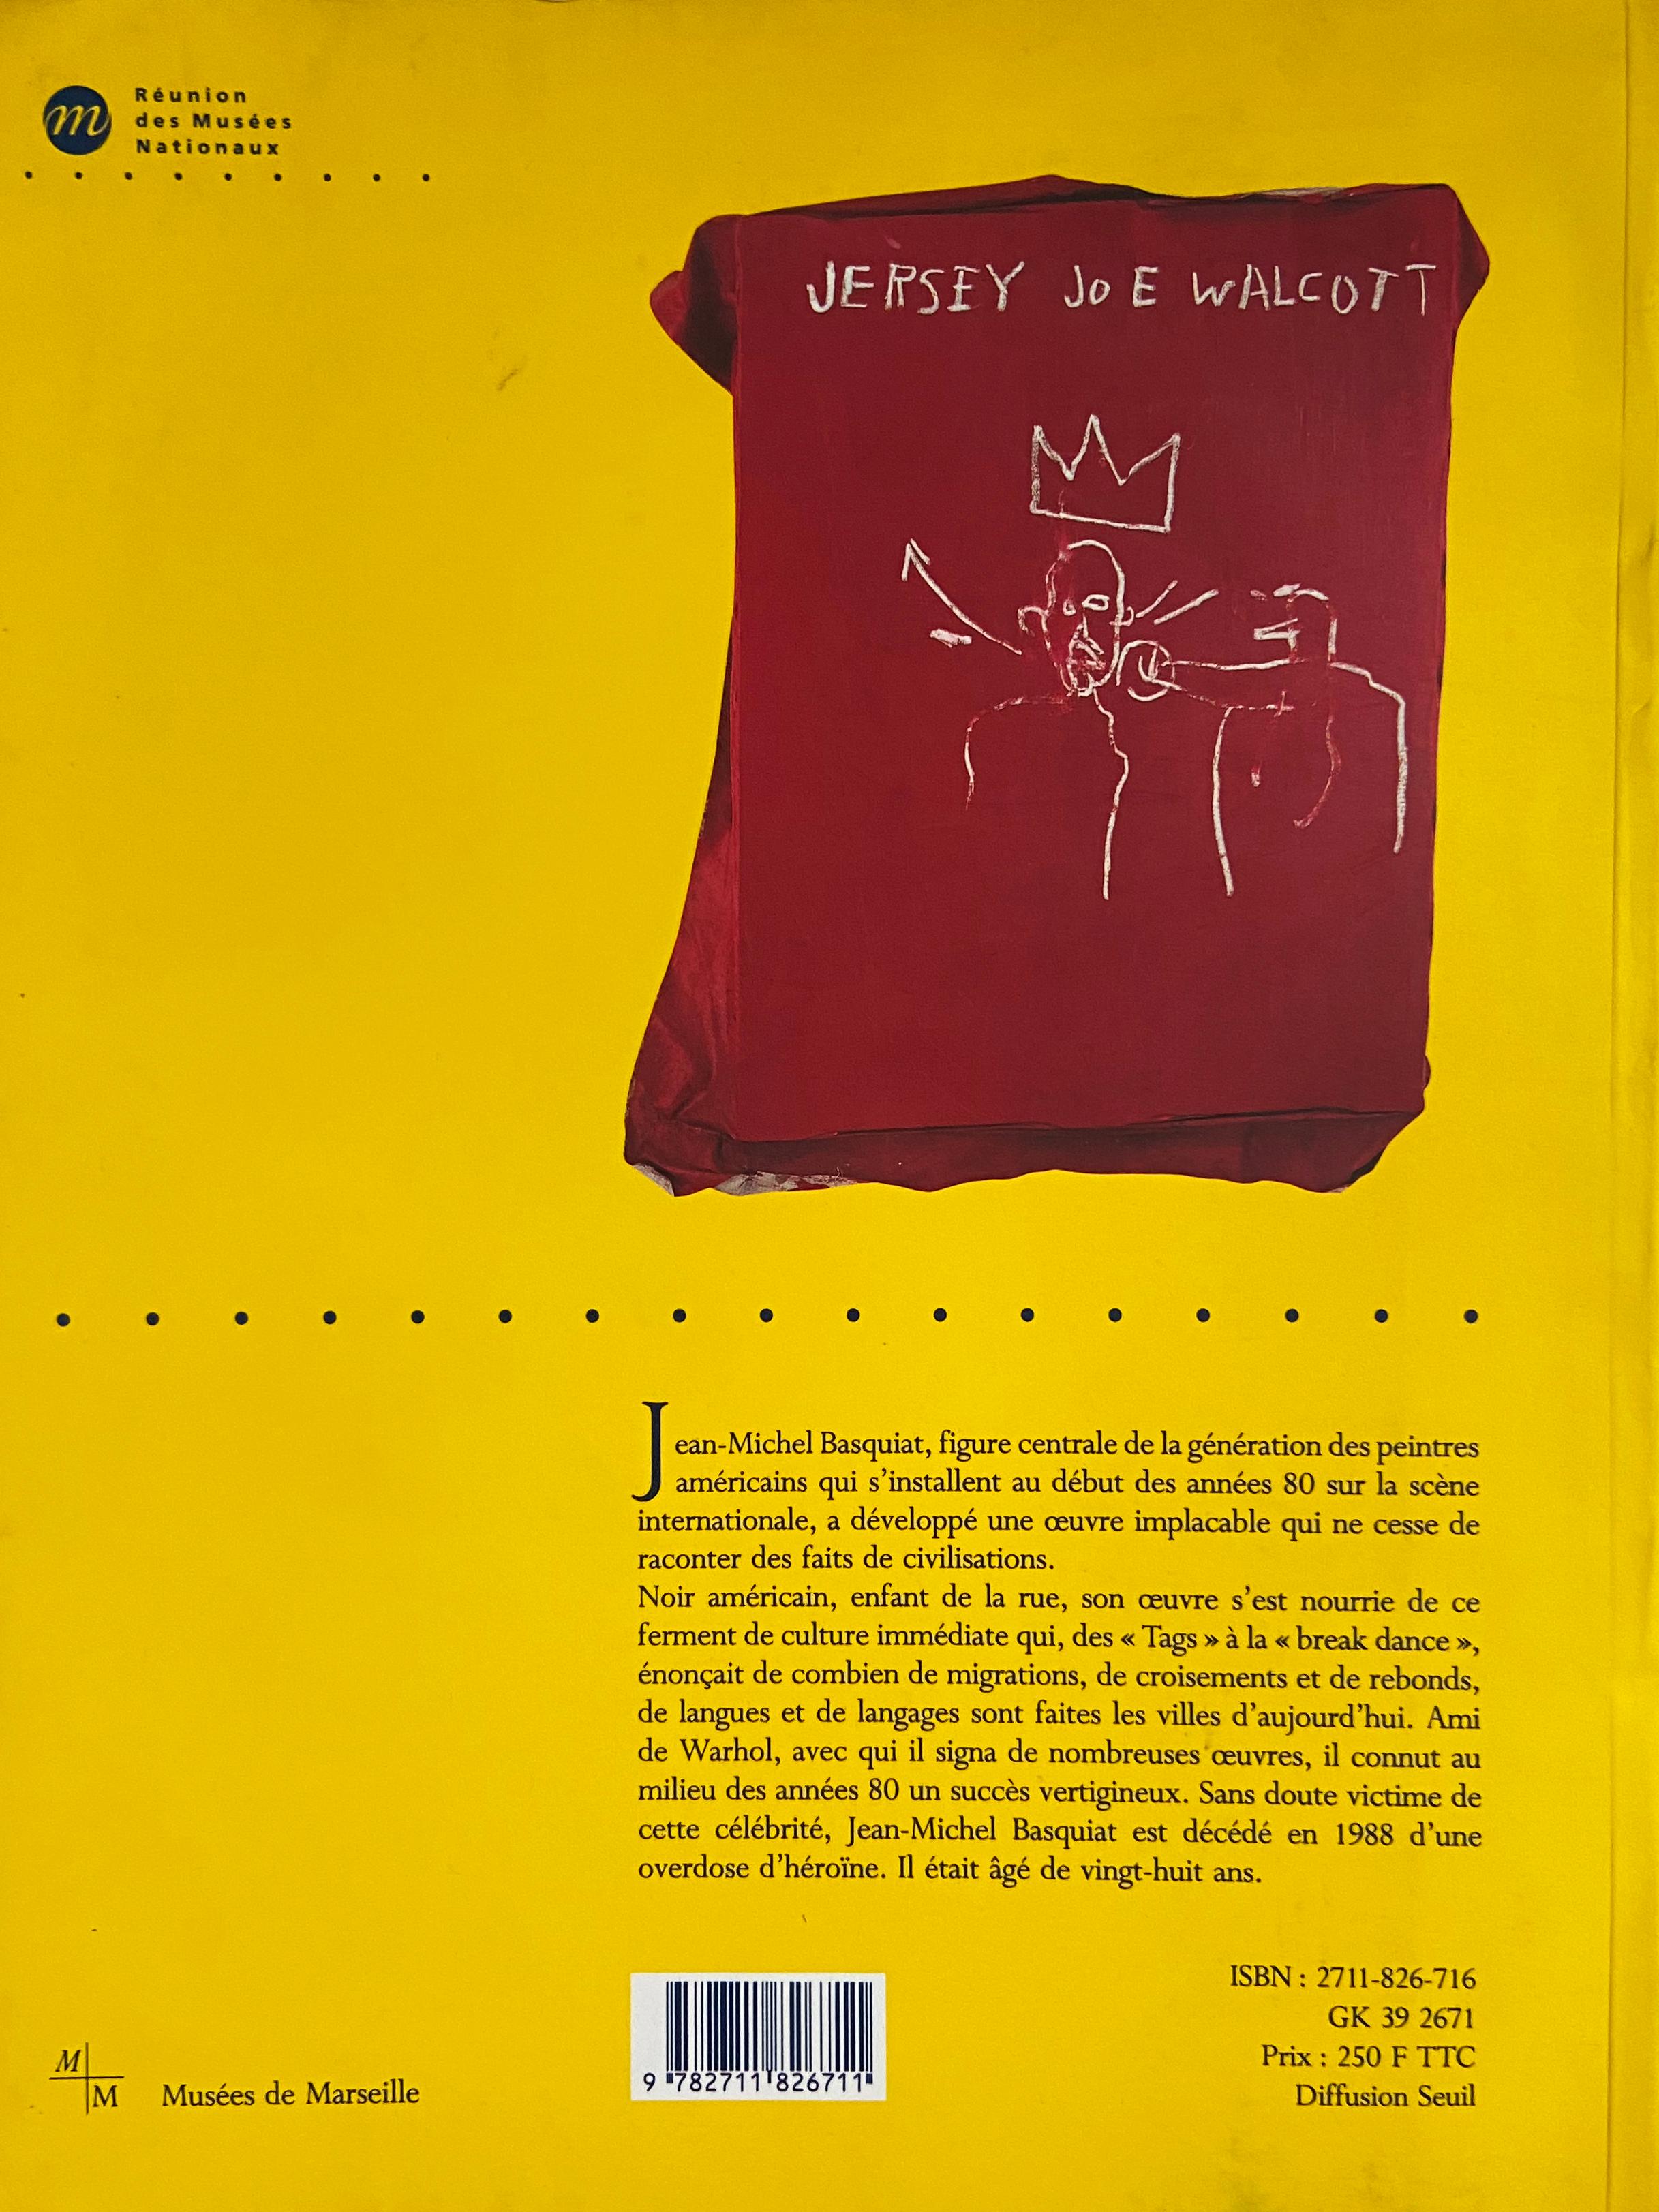 Original Exhibition Catalog, for Jean-Michel Basquiat – A Retrospective; Musée Cantini, Marseille, France, 1992.

Illustrated cover with flaps, 192 pages; approx 10 x 12 inches (30 x 23 cm).

Approximately 65 color reproductions plus some rare